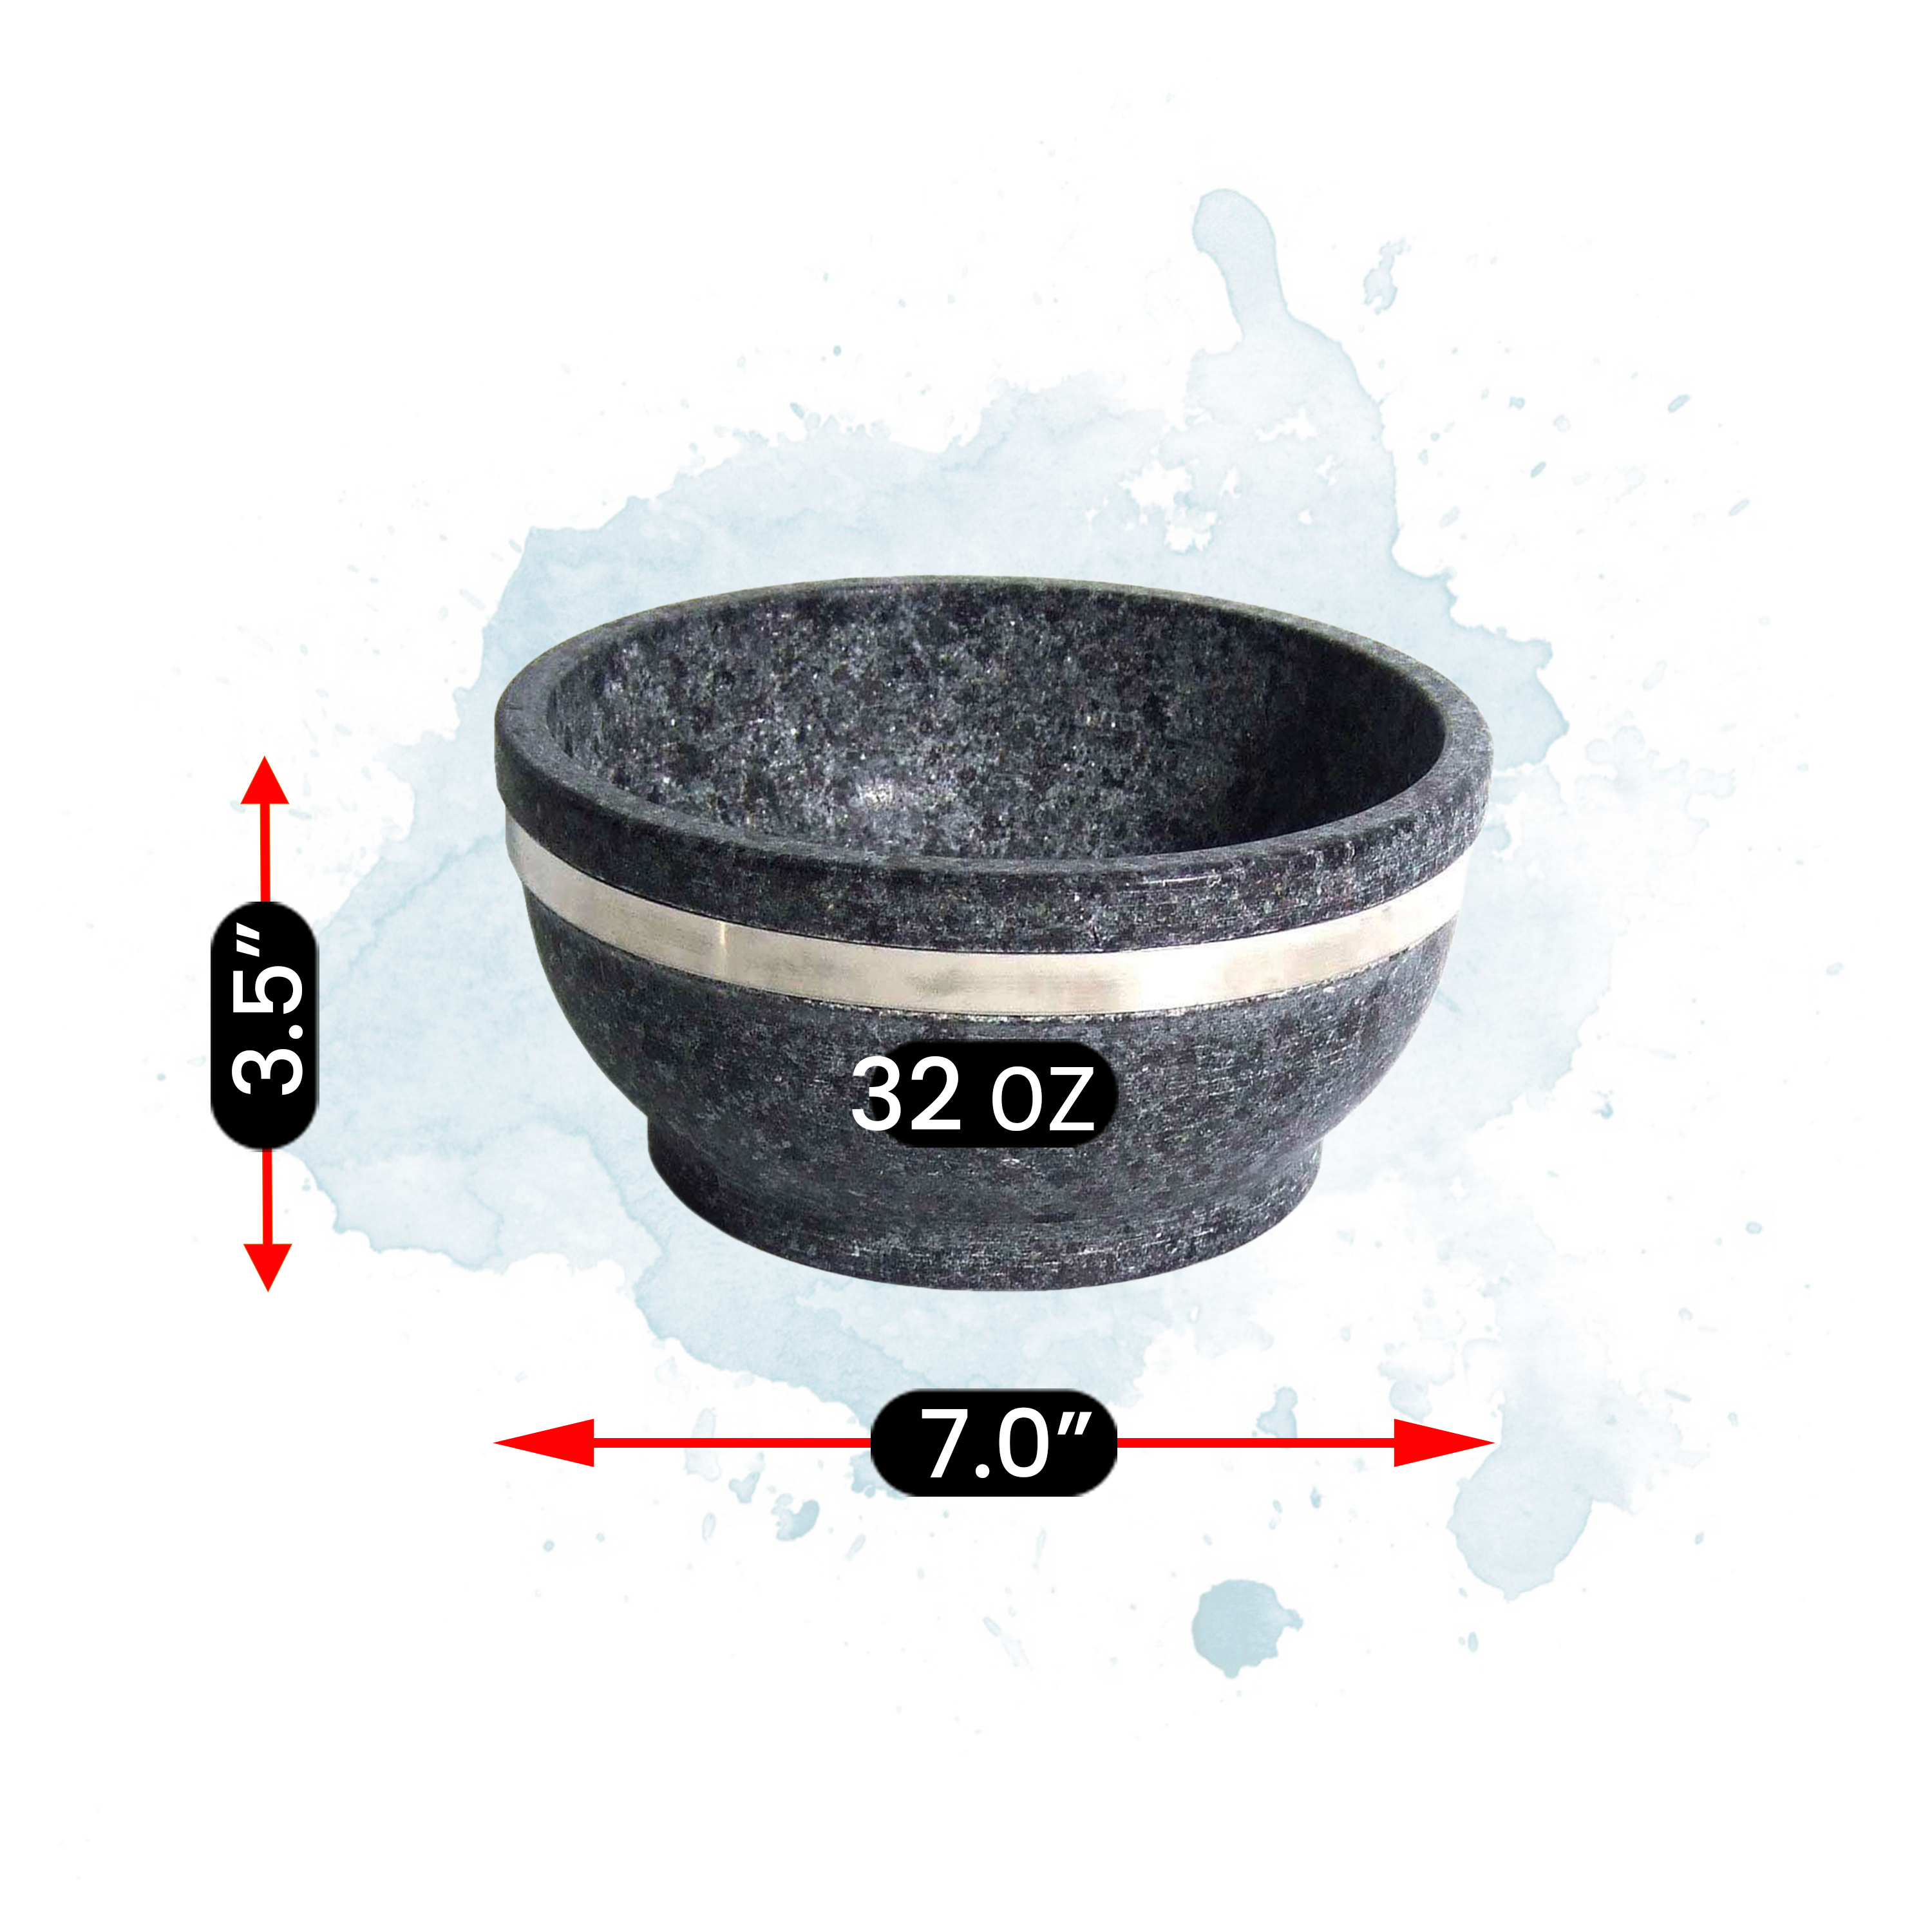 https://ancientcookware.com/images/stories/virtuemart/product/kor_2302_07_5_Large_with_measurements.jpg